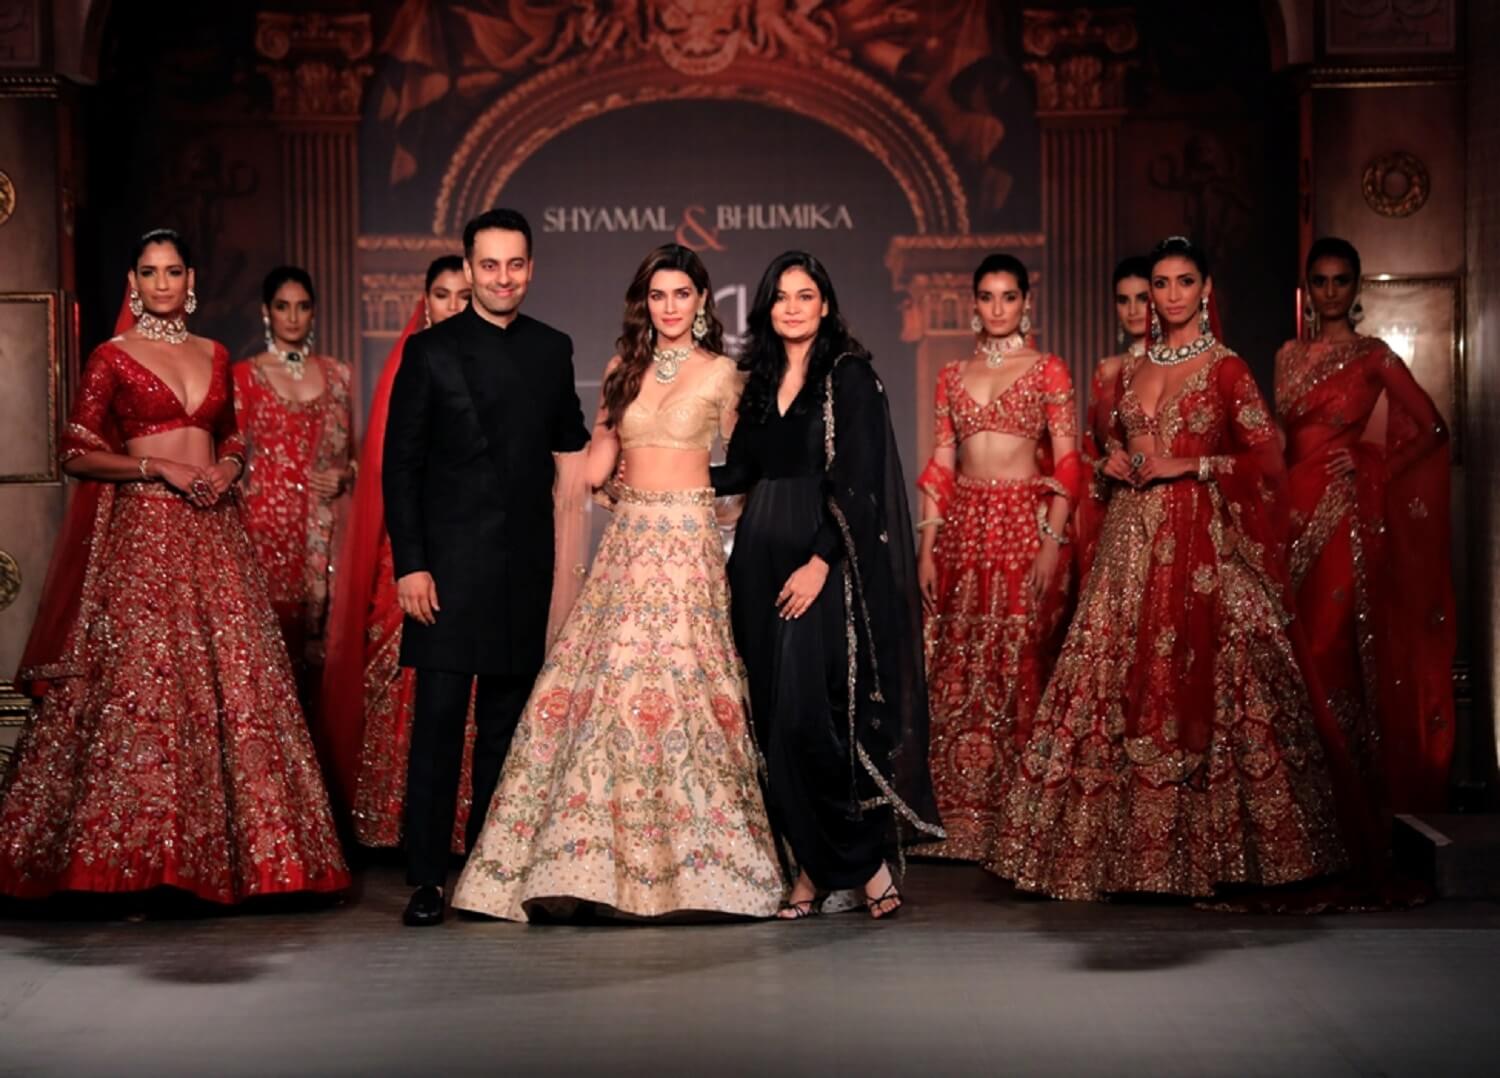 Shyamal & Bhumika plan continued expansion to reach brides in India and  abroad